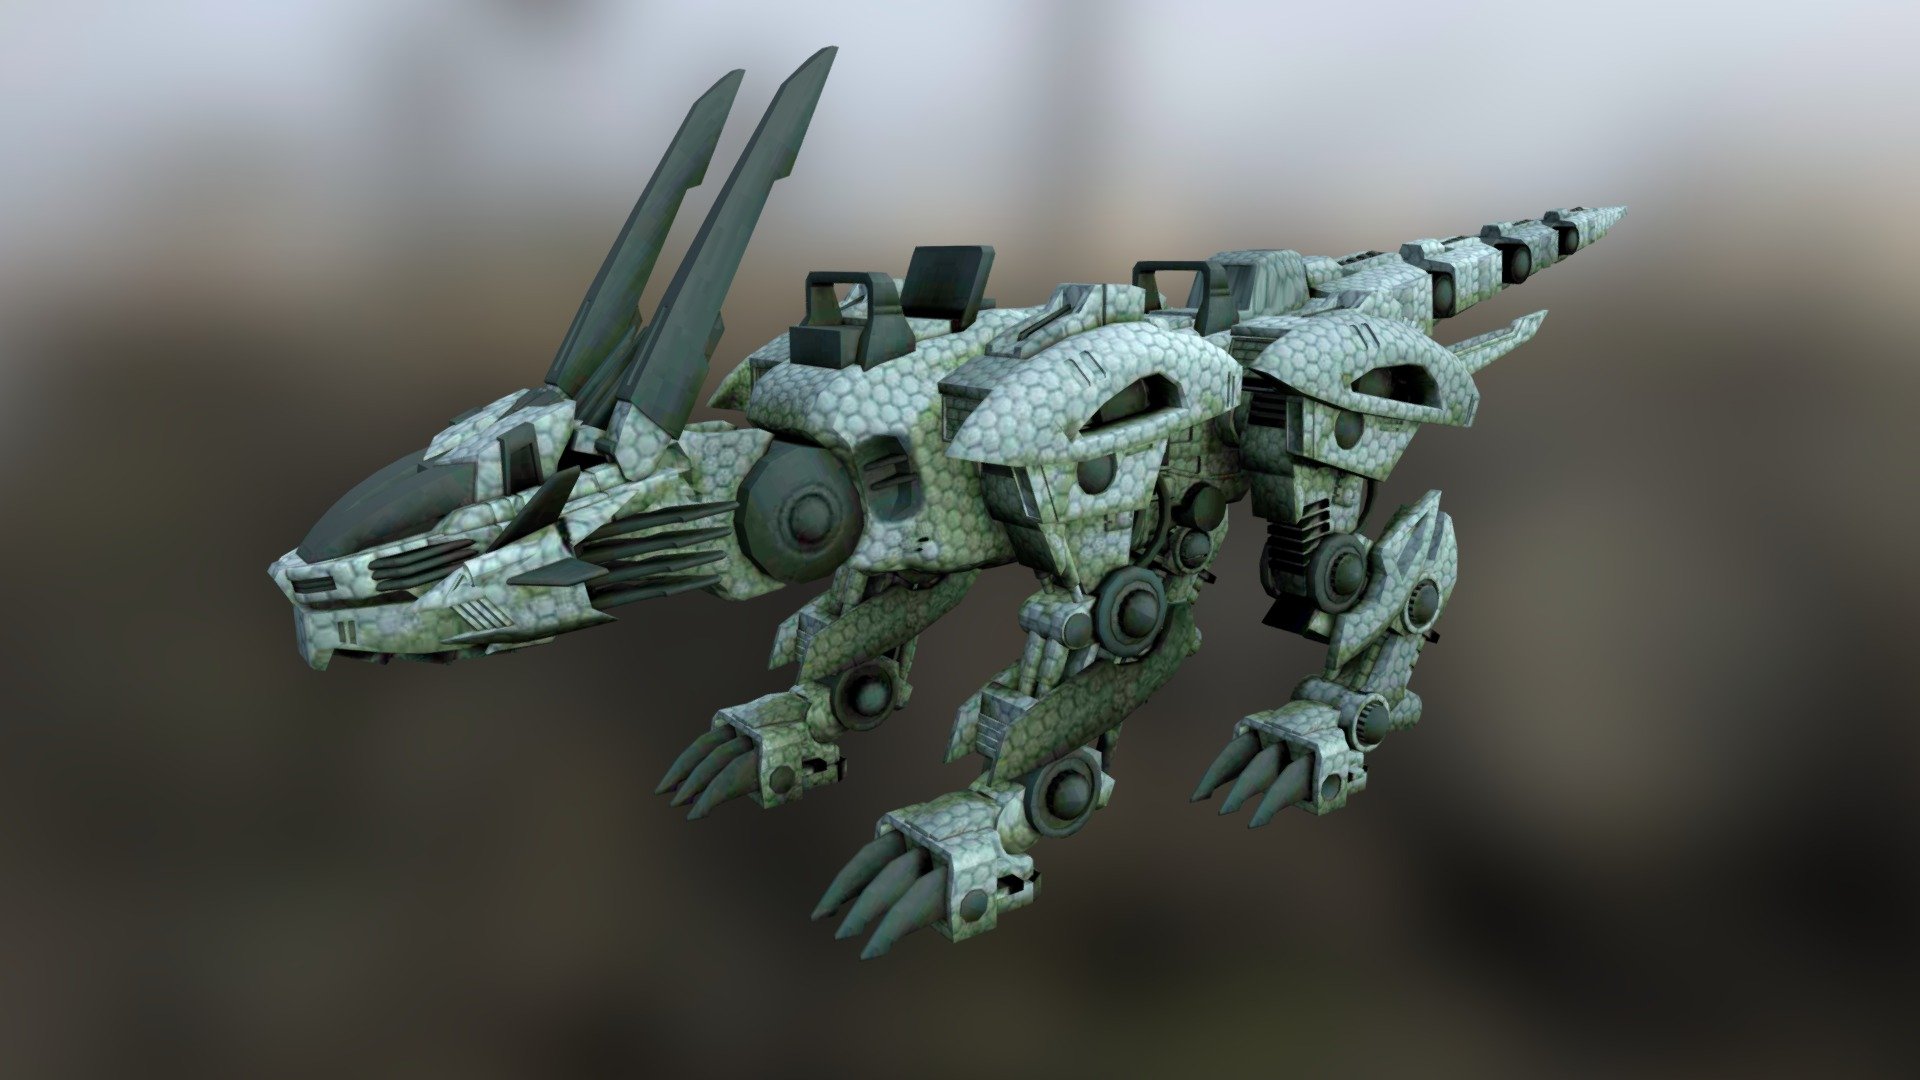 A model of a robot lion (or could it be a tiger?).

Product Features:
- Approx 24,427 polygons.
- Made entirely with 3 and 4 point polygons.
- Includes group information, which your software should interpret as separate parts, which includes:
&ndash; All 4 legs, Head, Ears, Tail sections
- Although the model includes these parts, this version of the model is not rigged.
- Includes logically named materials, such as Windows and Main Texture.
- The model has basic UV mapping and textures (in jpg format) are included, at 2048x2048 pixels.

Original model created by Moscowich80. Uploaded for sale here with her full permission 3d model